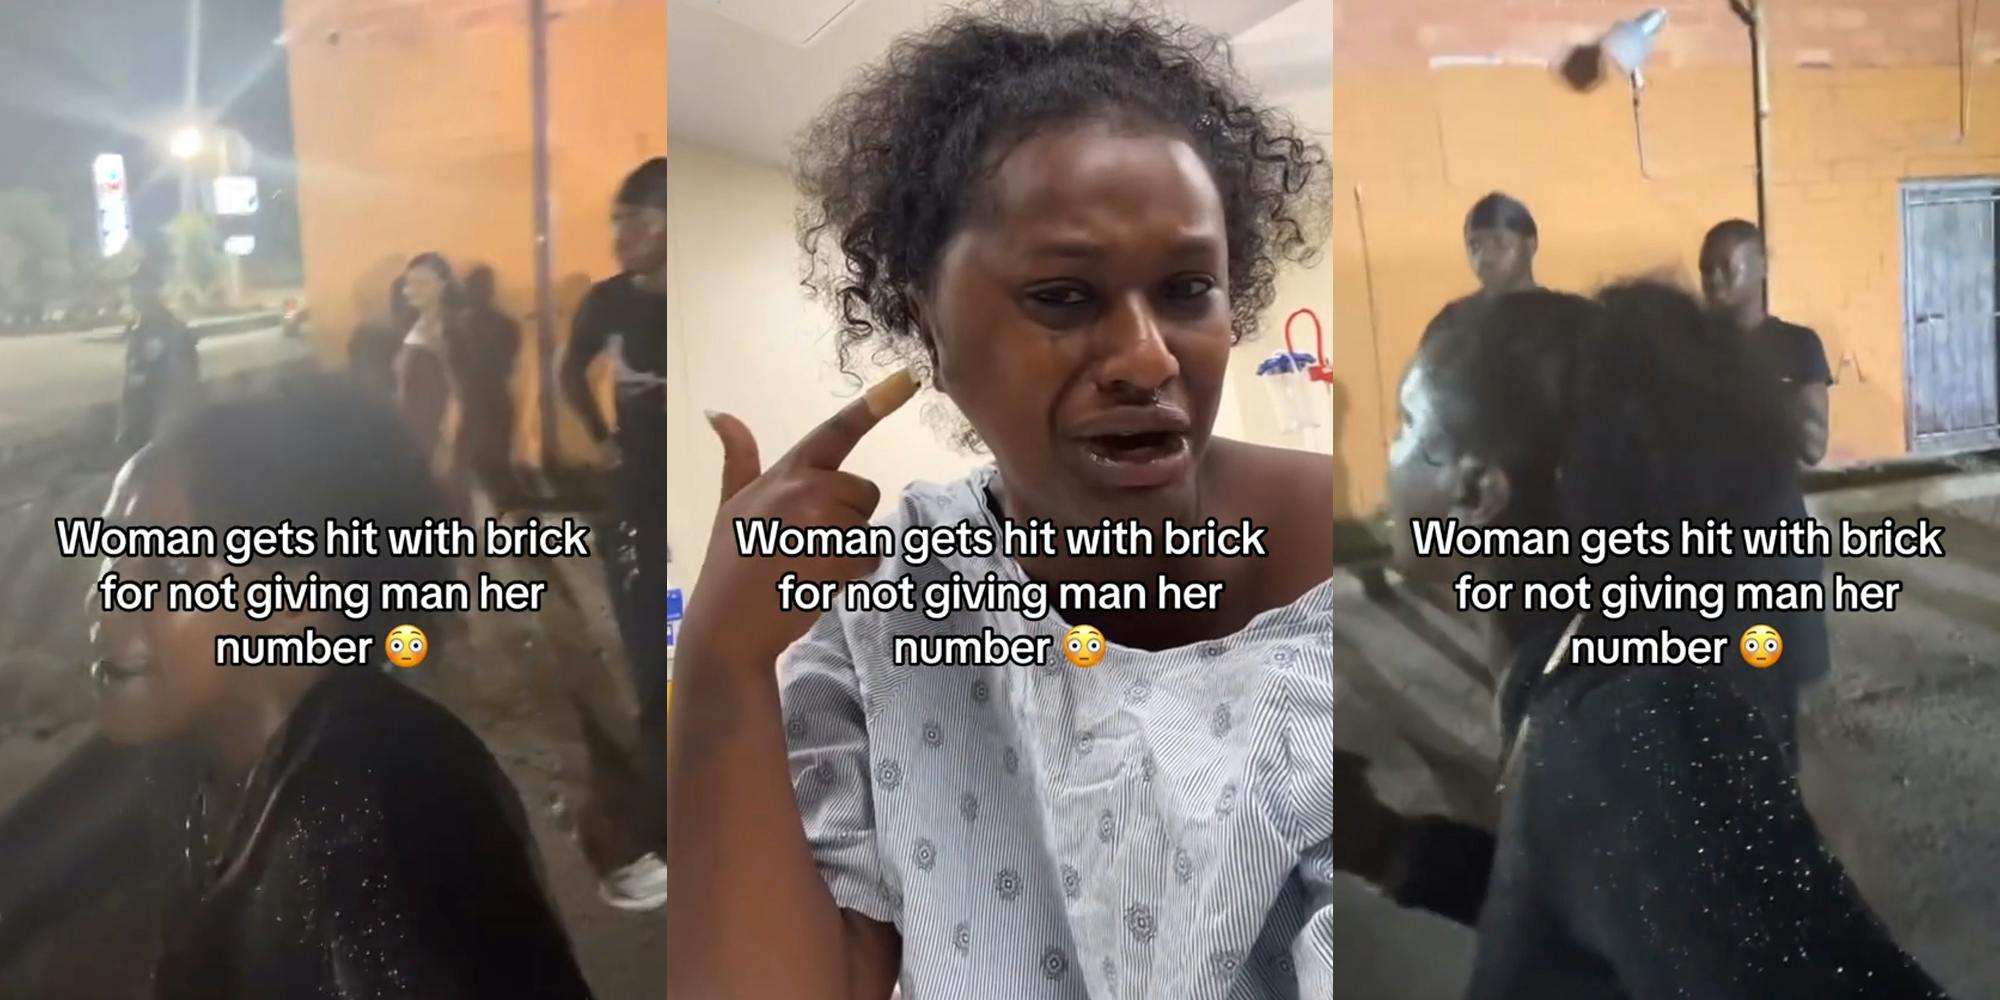 woman in lot with people with caption "Woman gets hit with brick for not giving man her number" (l) woman in hospital with caption "Woman gets hit with brick for not giving man her number" (c) woman in lot with people with caption "Woman gets hit with brick for not giving man her number" (r)